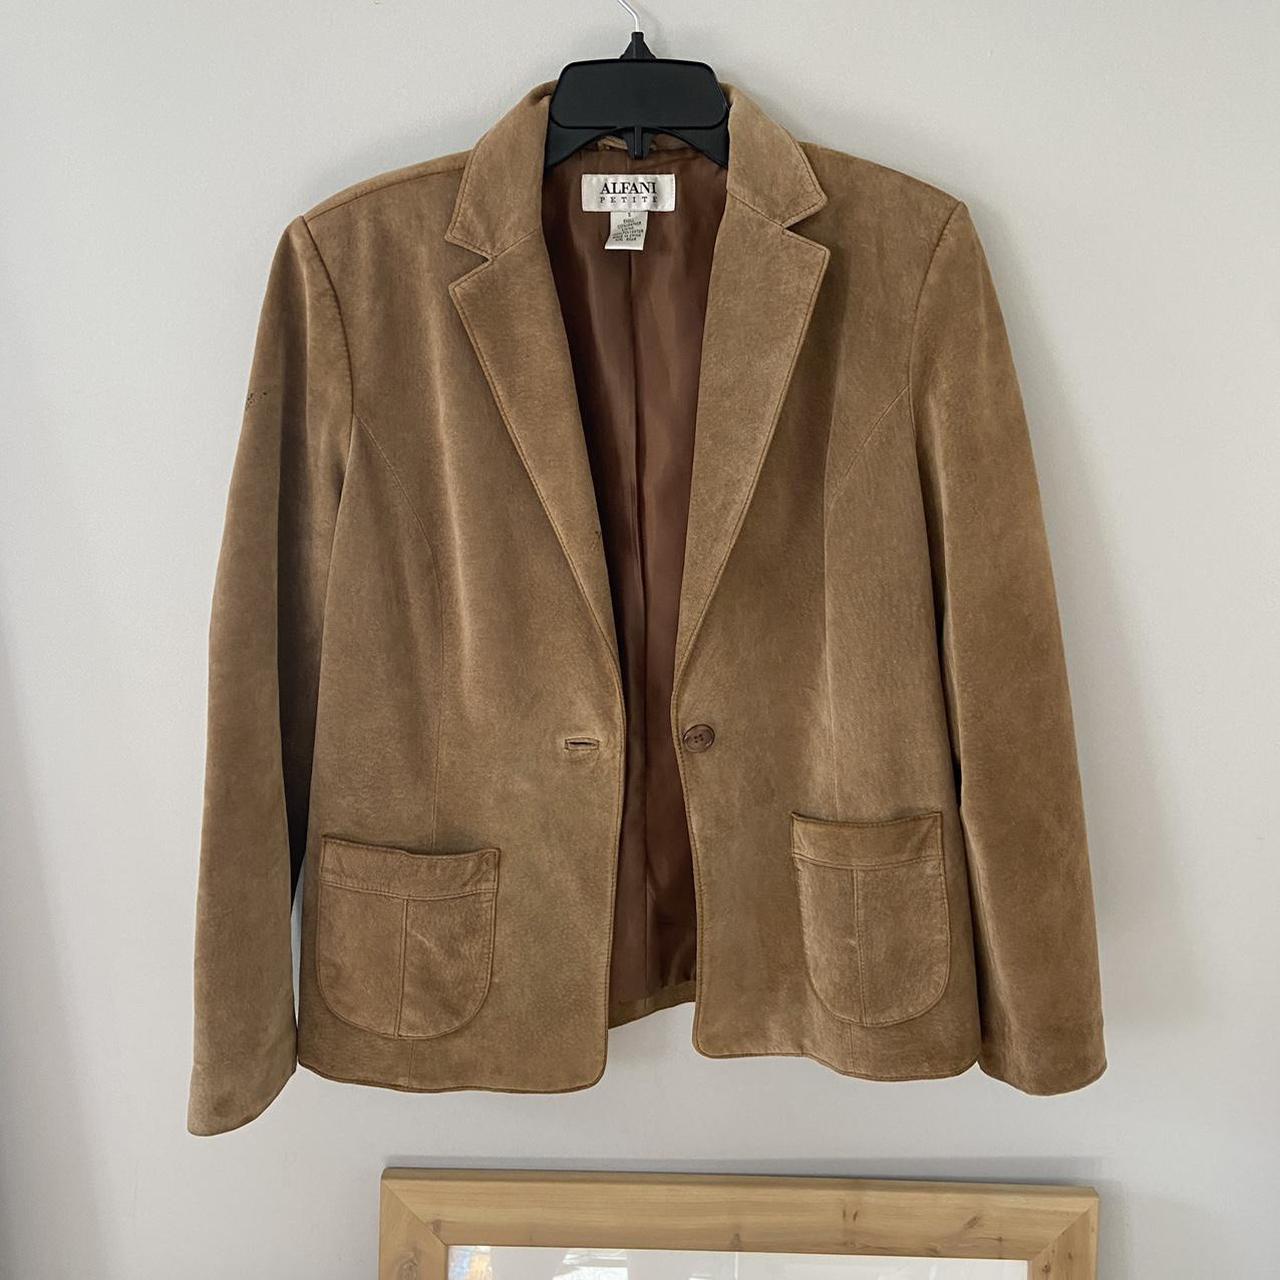 Product Image 1 - Light brown suede leather jacket.